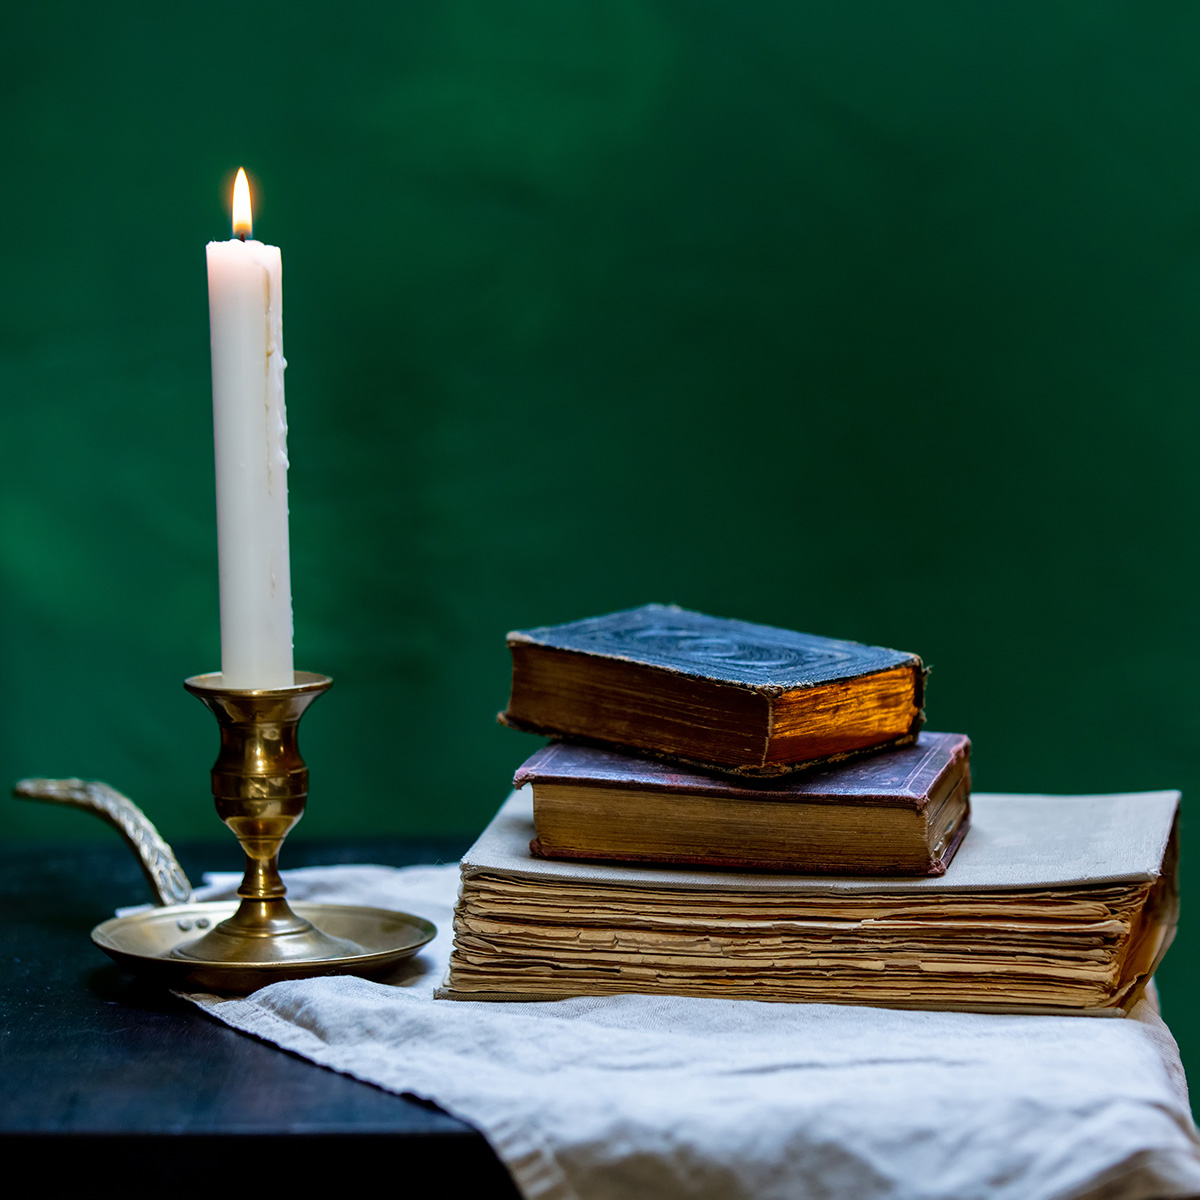 Old books and a lit candle